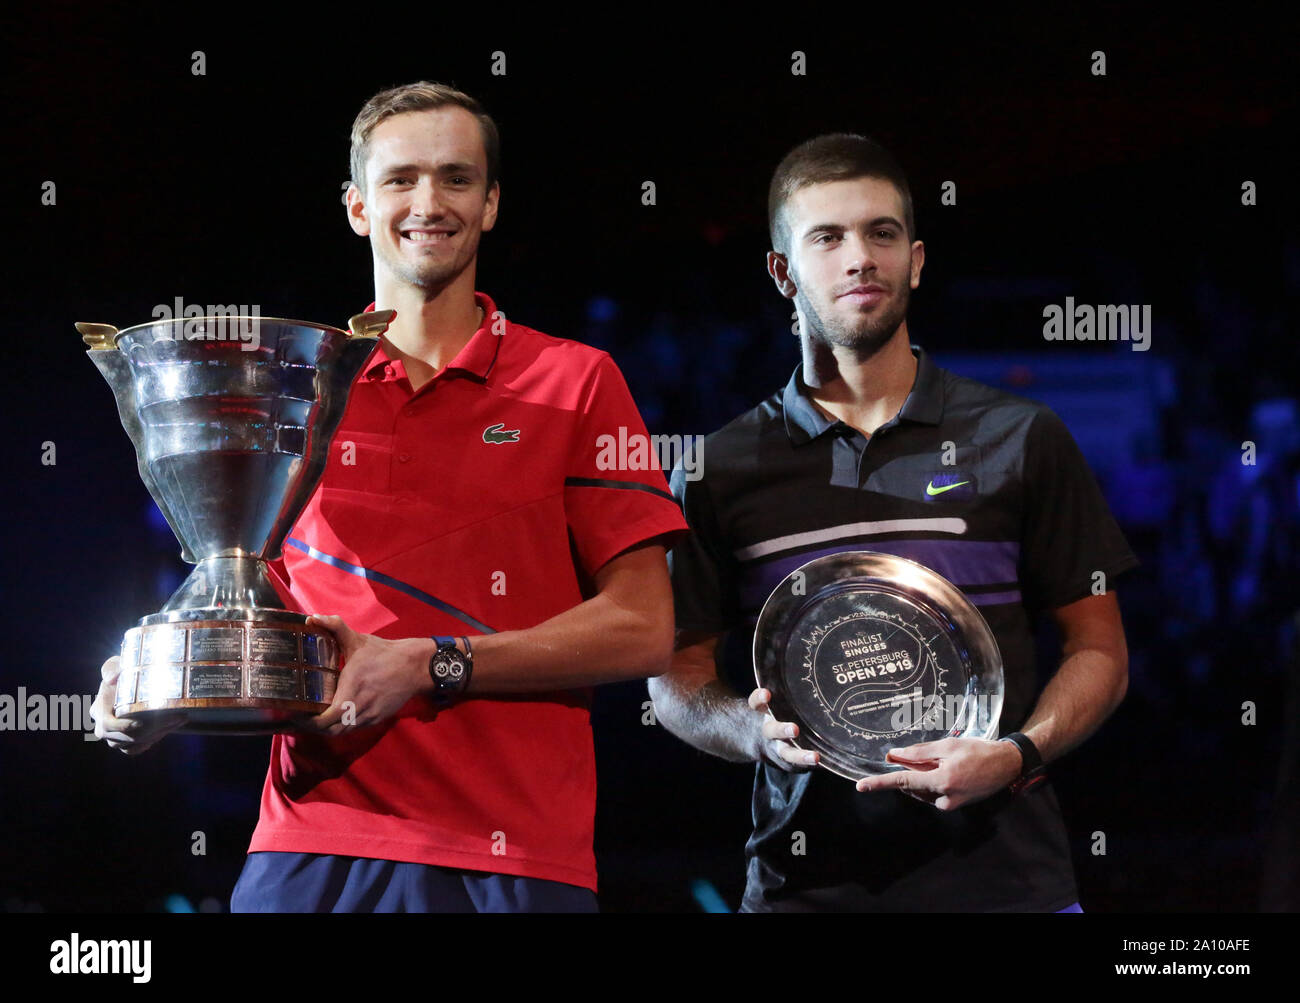 St. Petersburg, Russia. 22nd Sep, 2019. Daniil Medvedev (L) of Russia and Borna Coric of Croatia pose with the trophies during the awarding ceremony after the final match at St. Petersburg Open ATP tennis tour in St. Petersburg, Russia, Sept. 22, 2019. Credit: Irina Motina/Xinhua/Alamy Live News Stock Photo